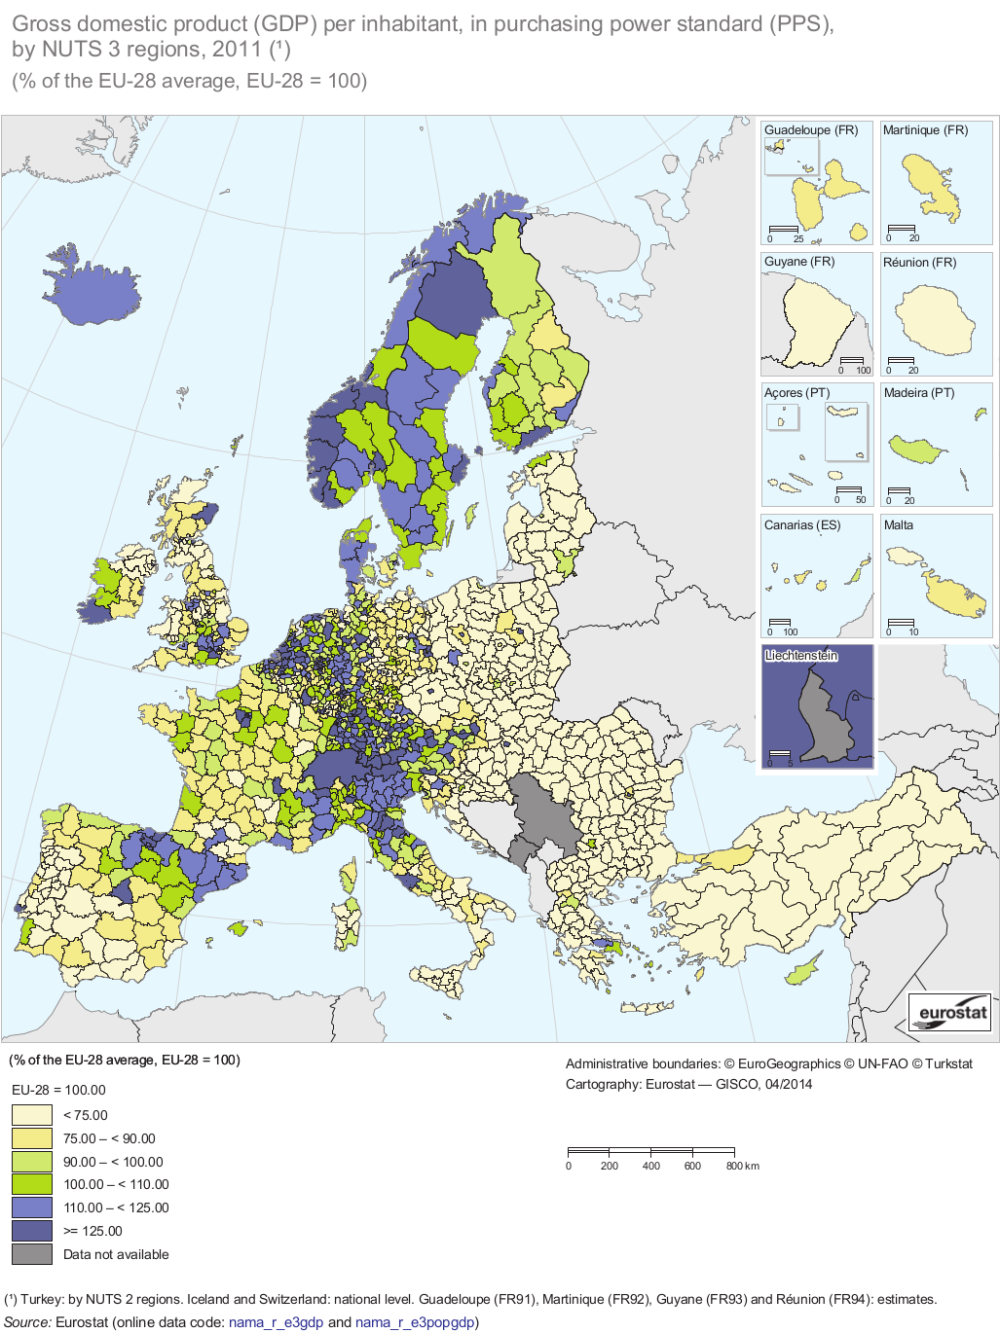 This map shown all the regions in Europe and the  amount of GDP per capita they have in 